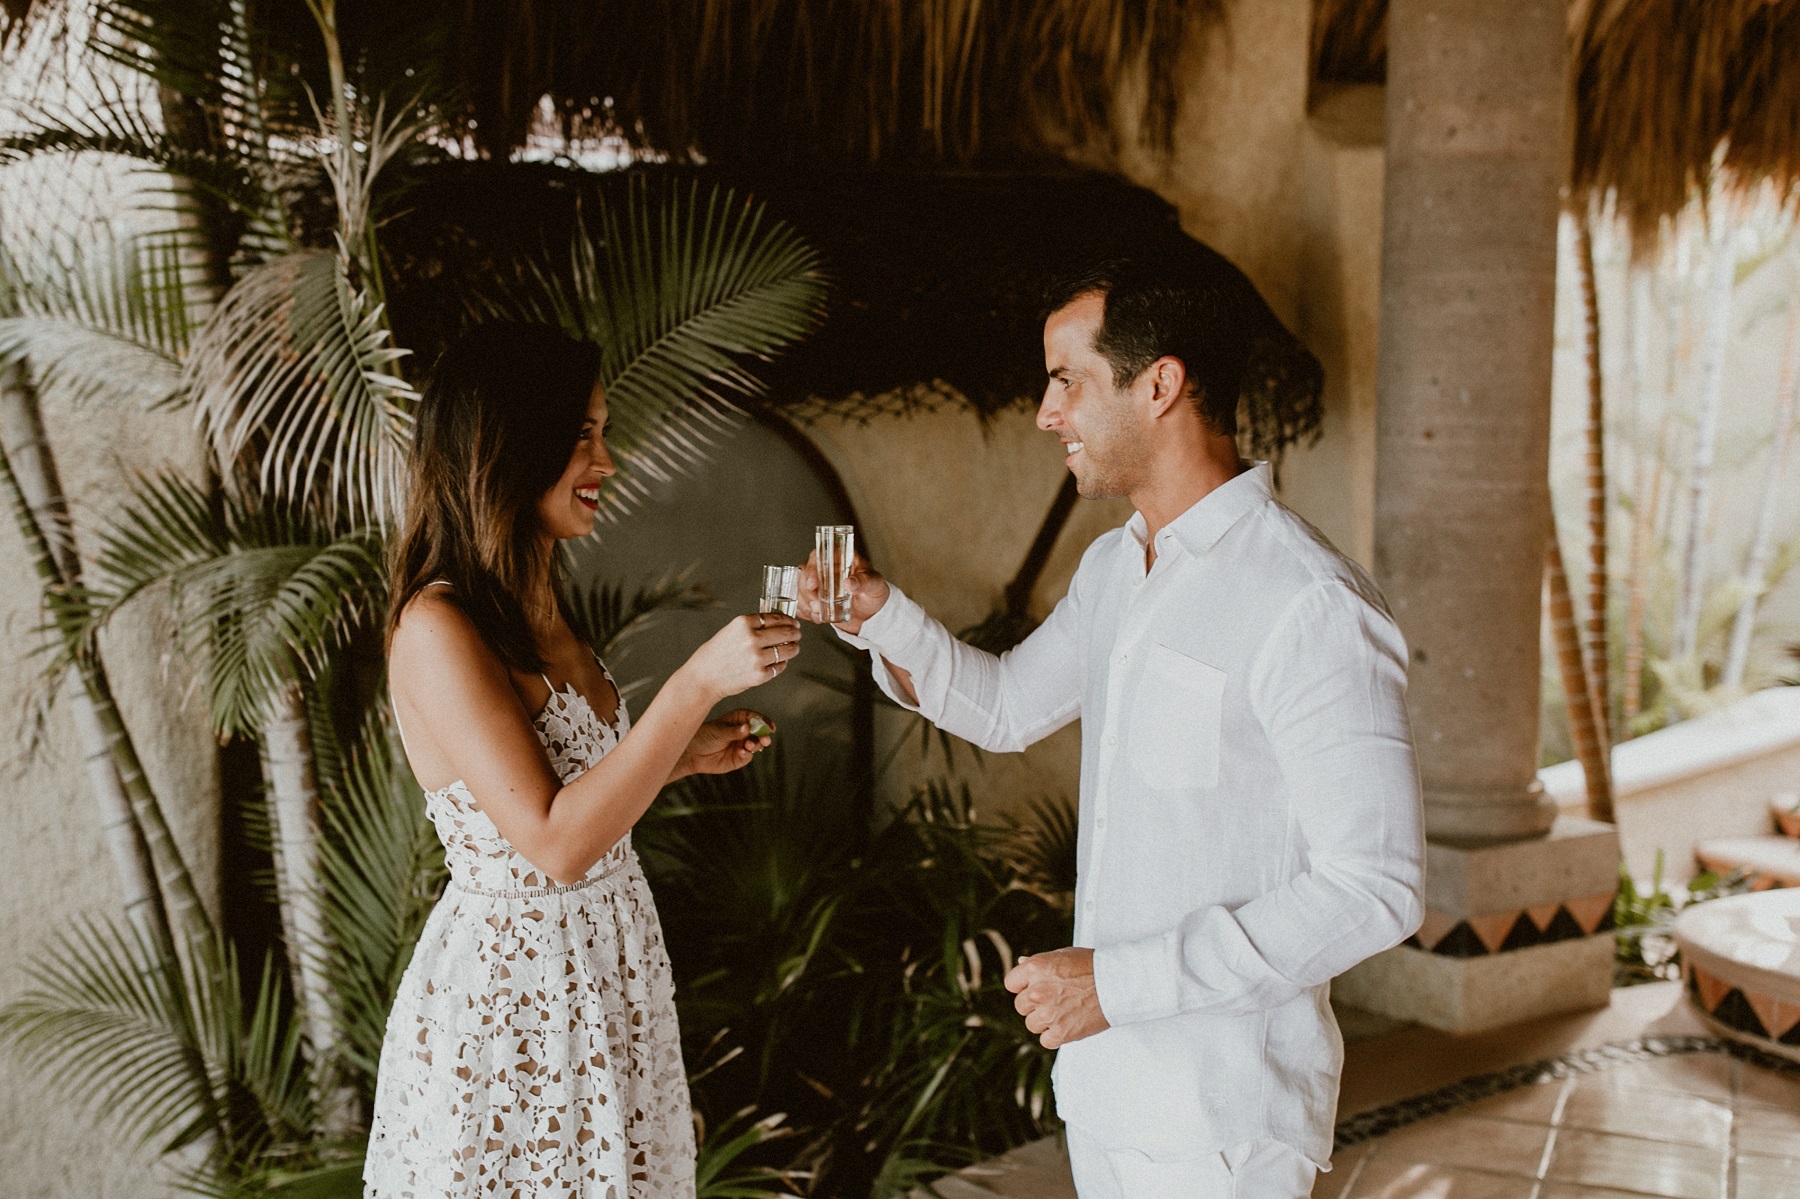 wedding weekend events private villas for rent for weddings cabo elena damy wedding planners